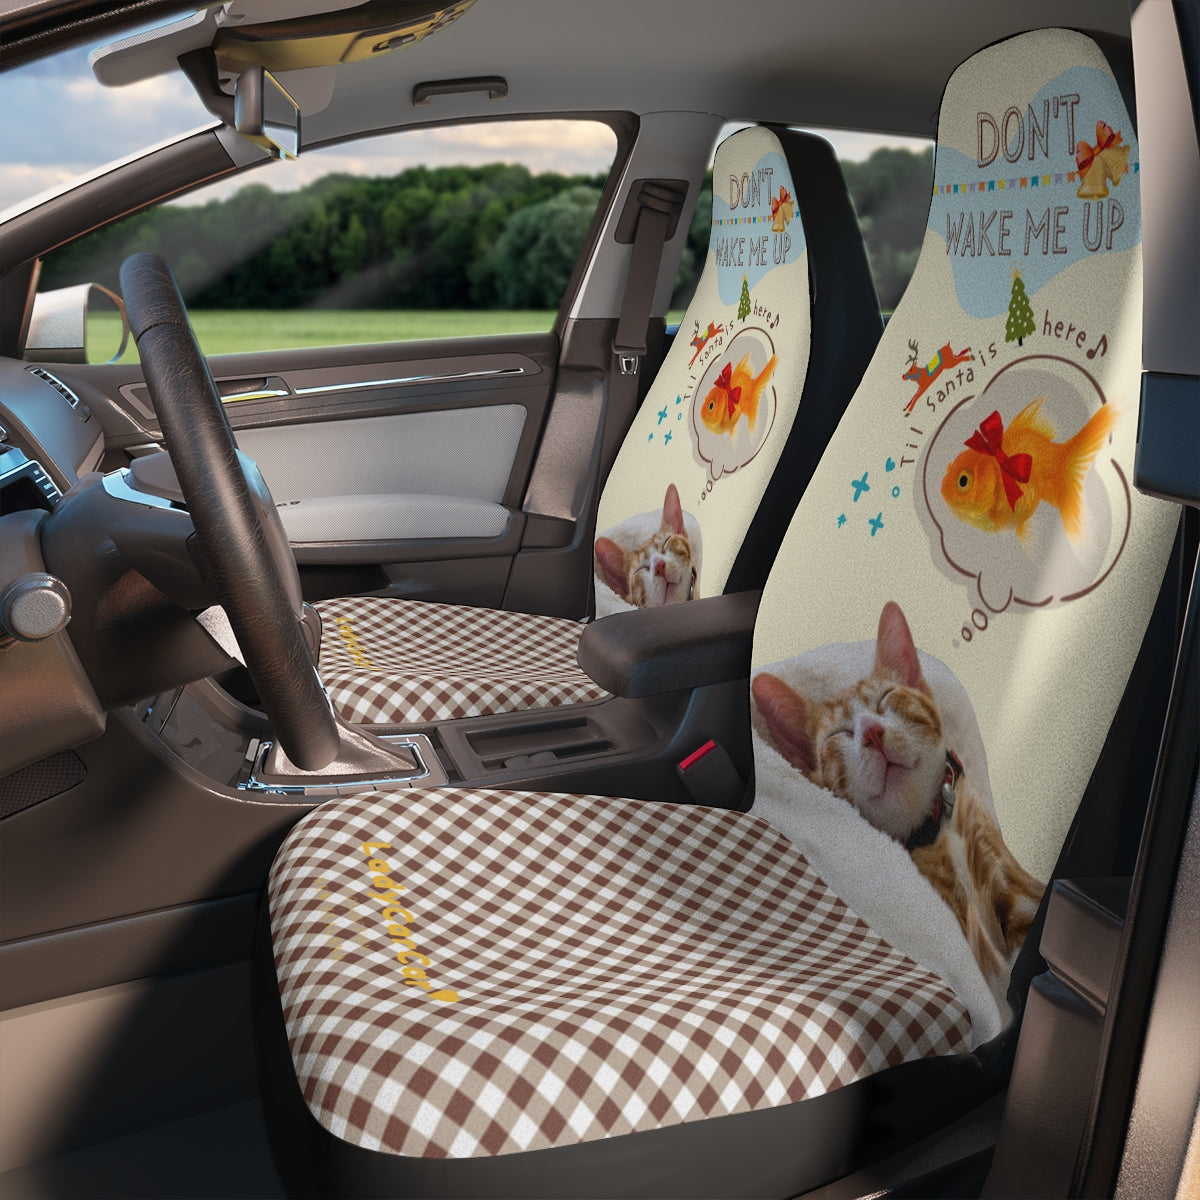 Fashionable Car Seat Covers - Lady CarCar Collection | Stylish